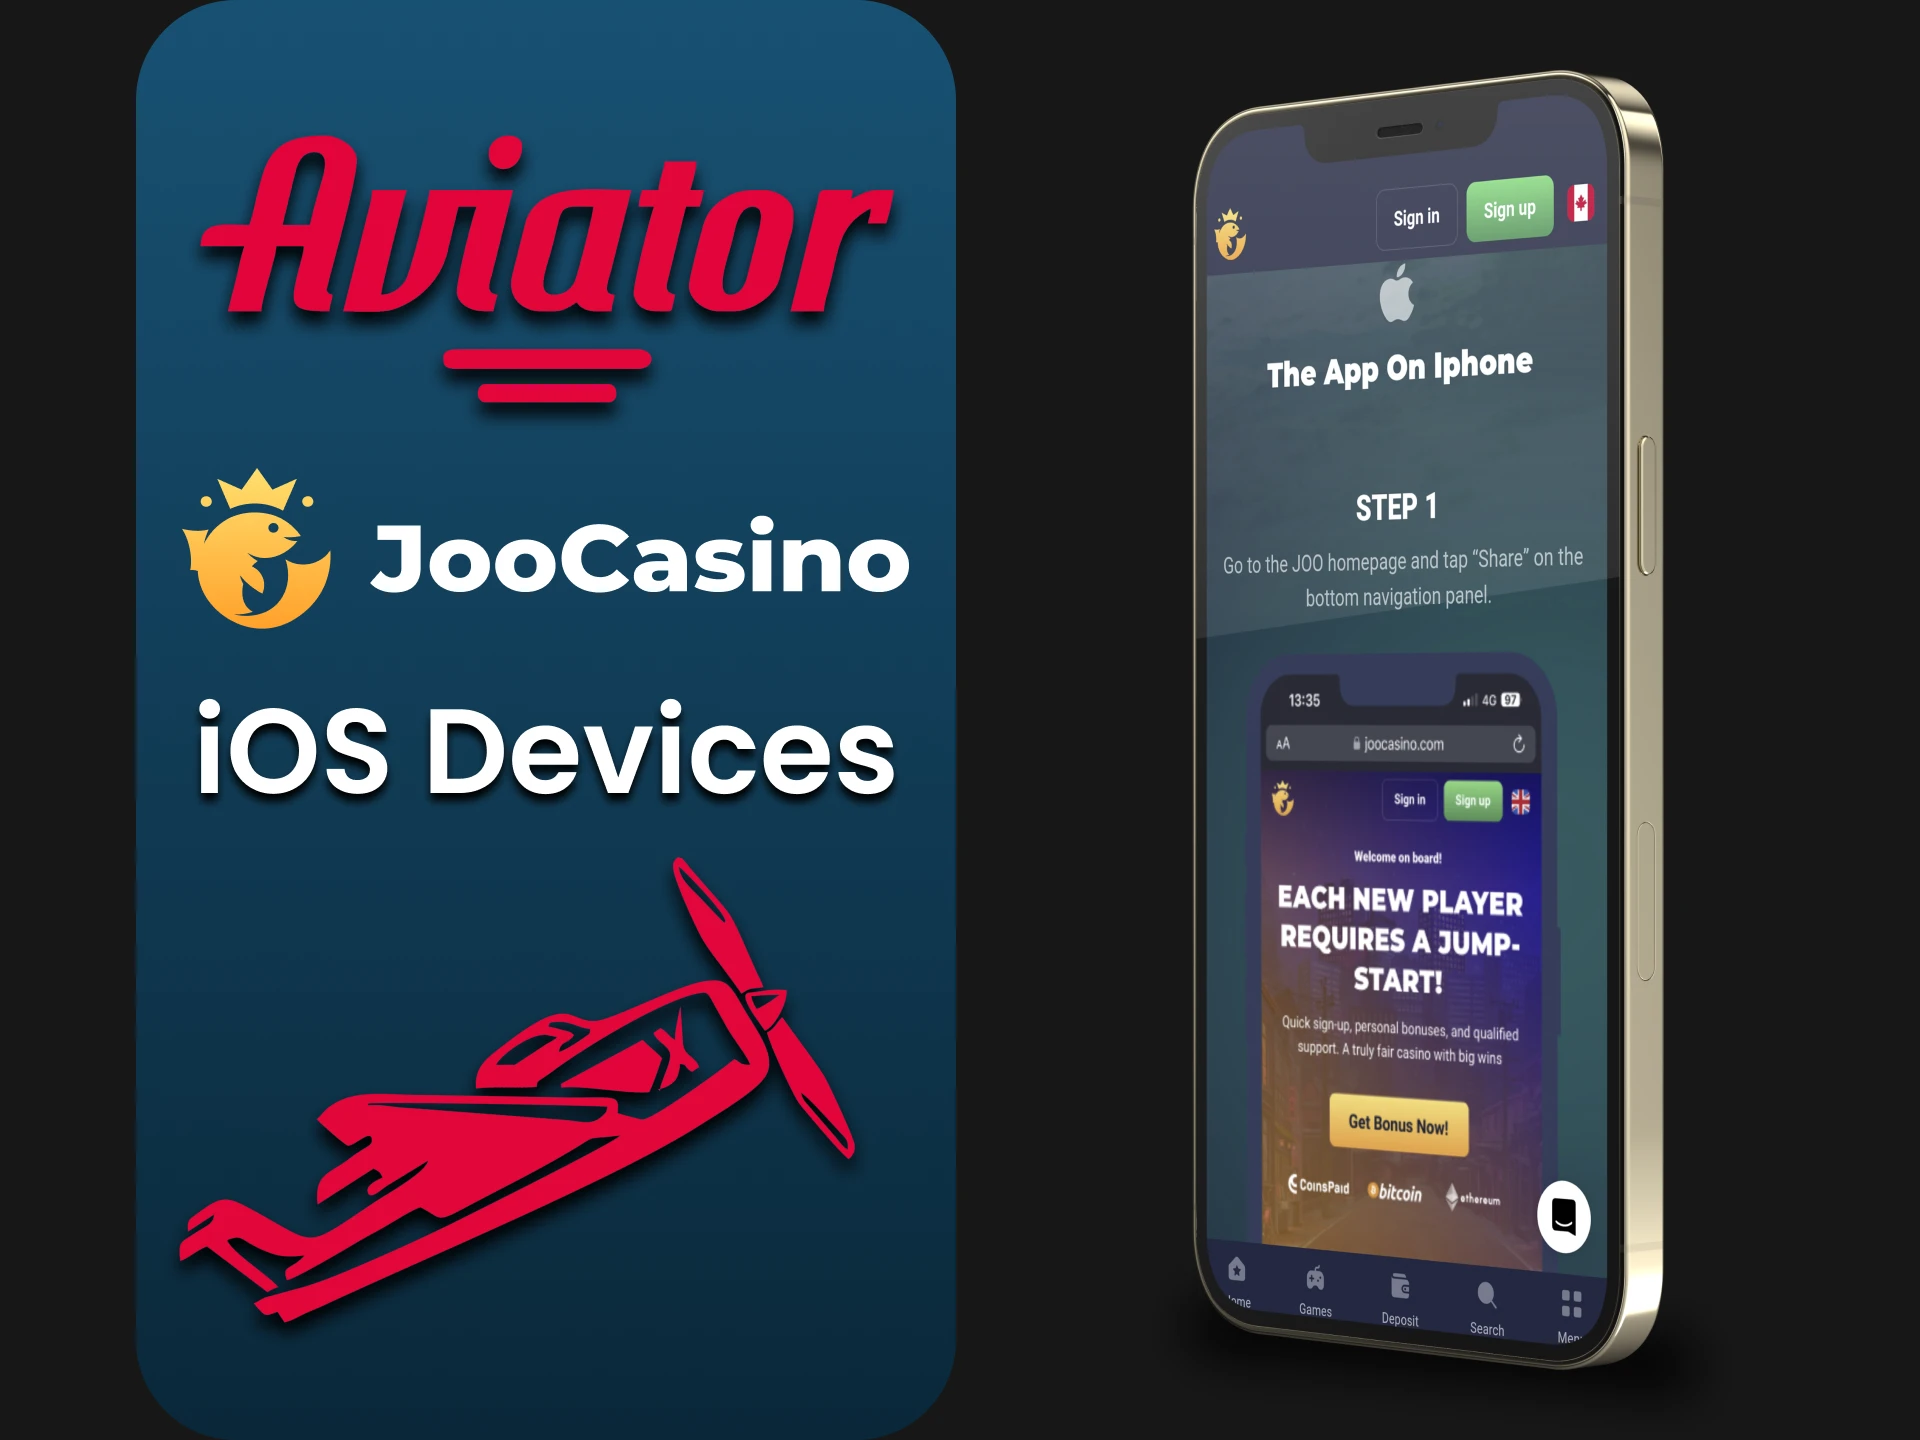 To play Aviator in the Joo Casino application, use iOS devices.